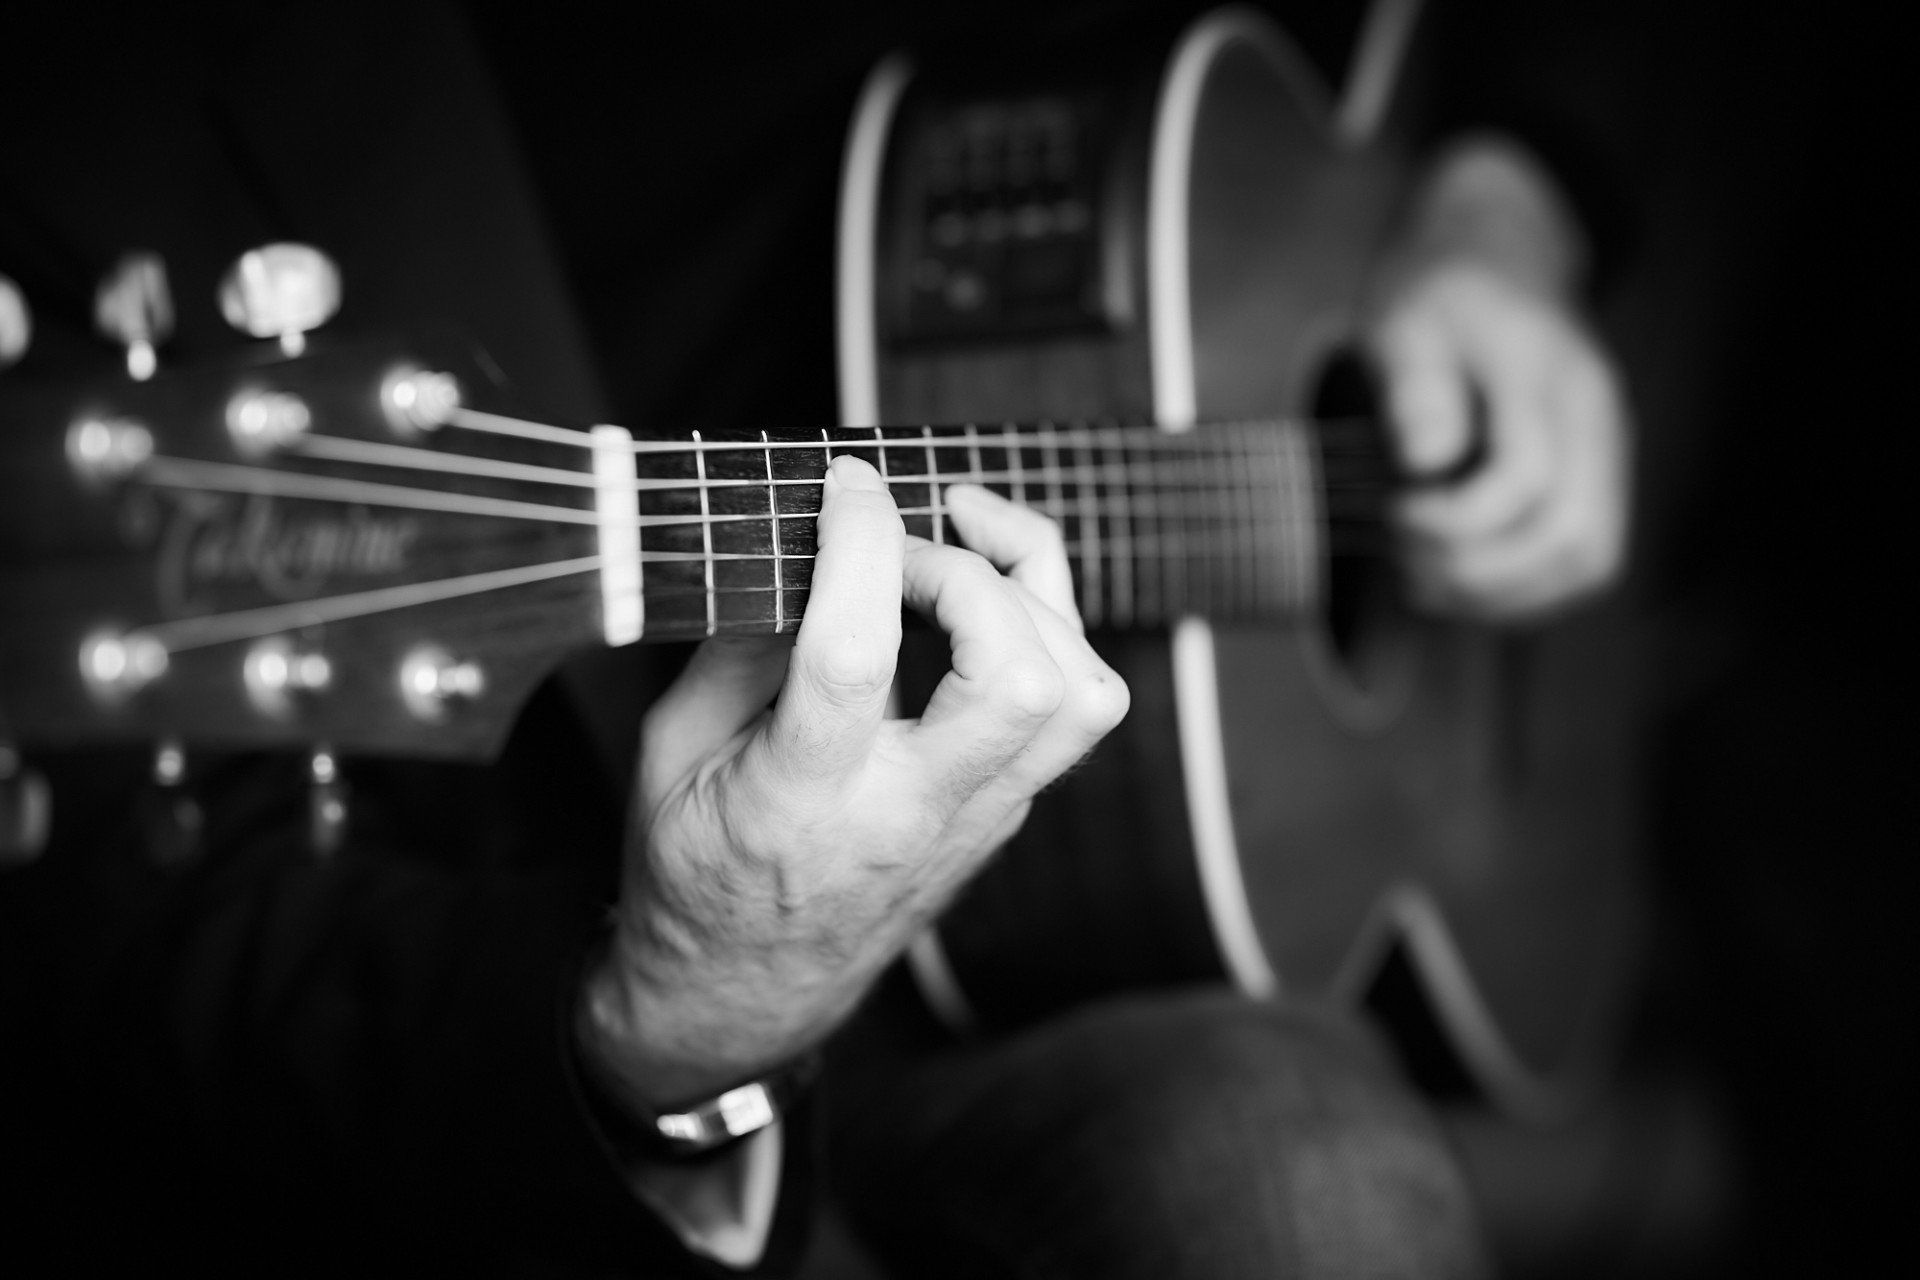 A guitarist's hands playing an acoustic guitar